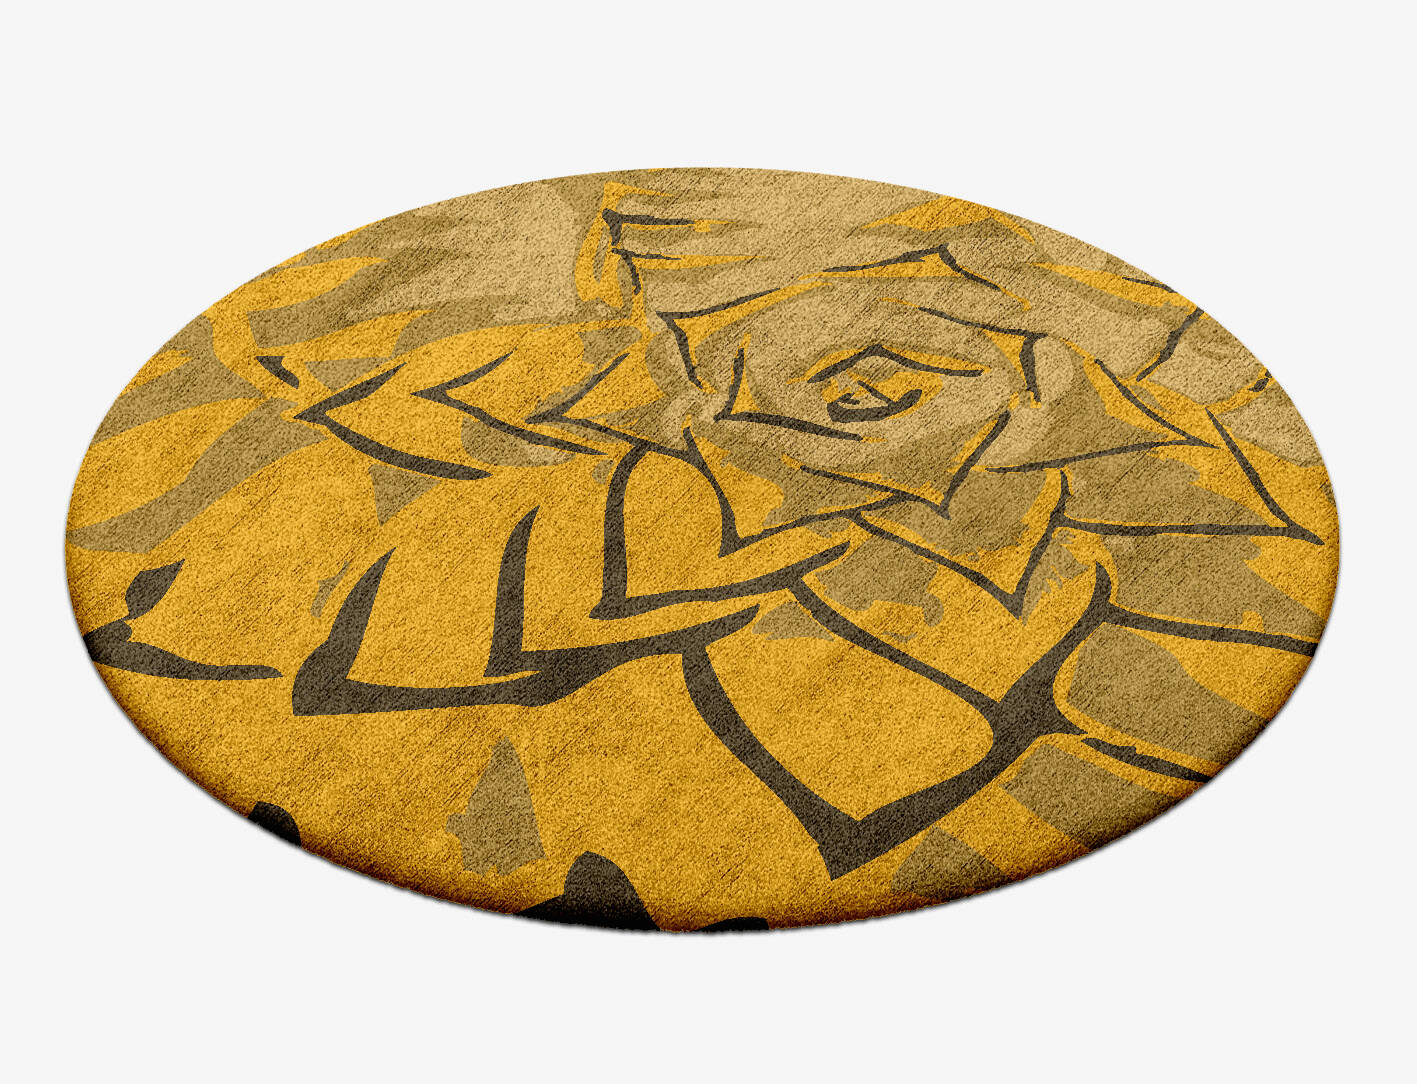 Rosette Abstract Round Hand Tufted Bamboo Silk Custom Rug by Rug Artisan